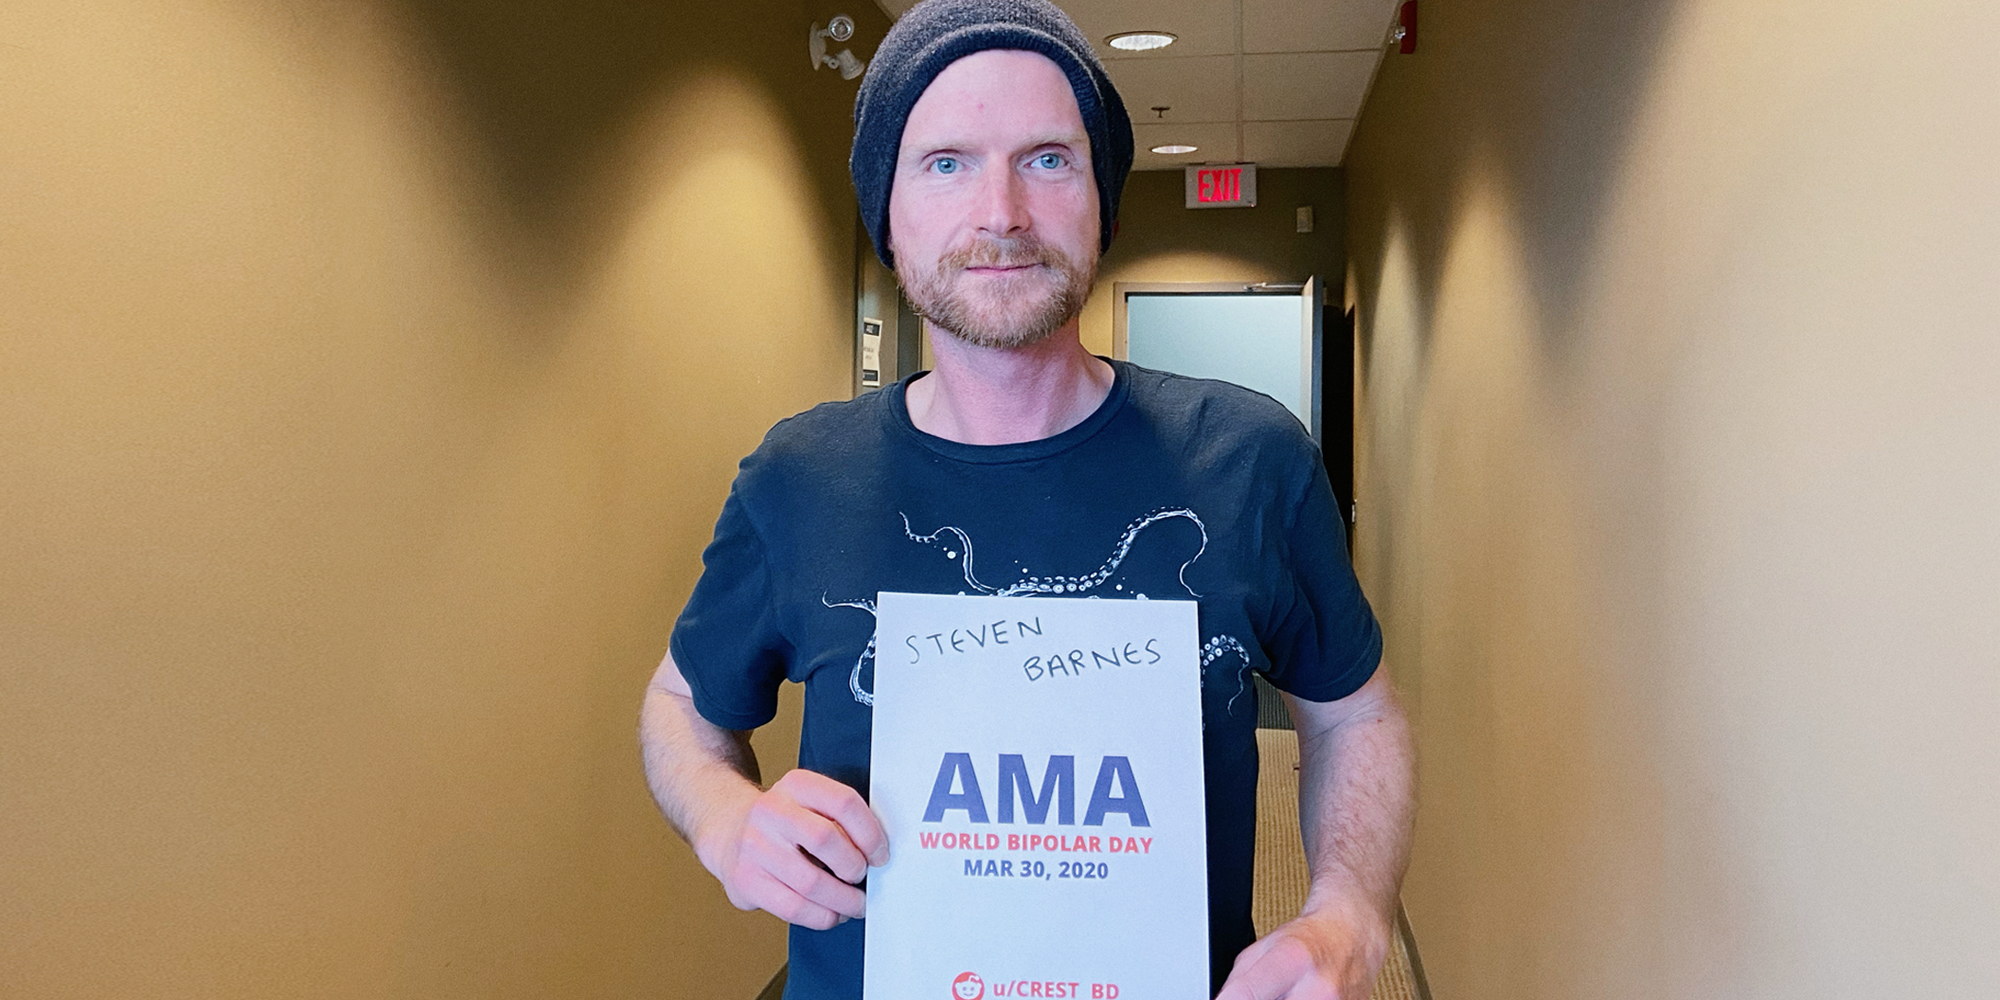 Dr. Barnes holding a sign proving he will be involved in the bipolar ama.